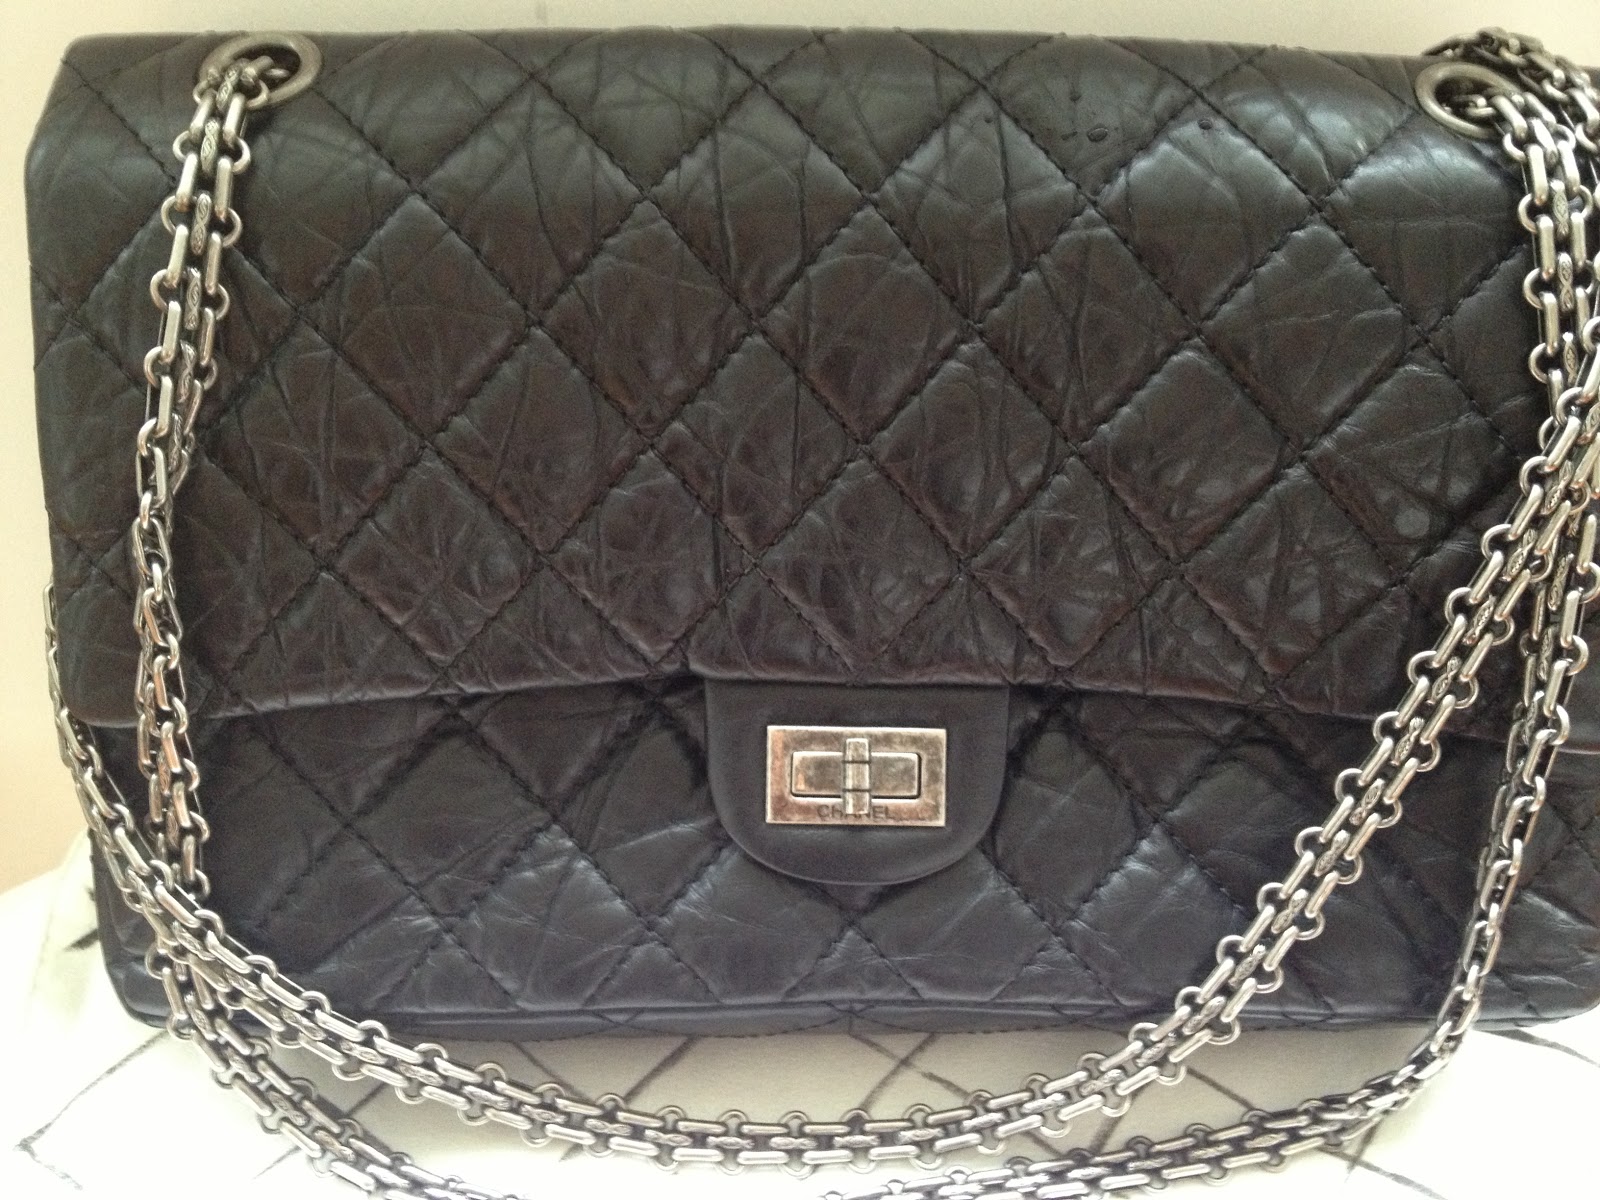 Preloved 100% Authentic Designer Bags for sale: Preloved Chanel 2.55 Black leather with silver chain